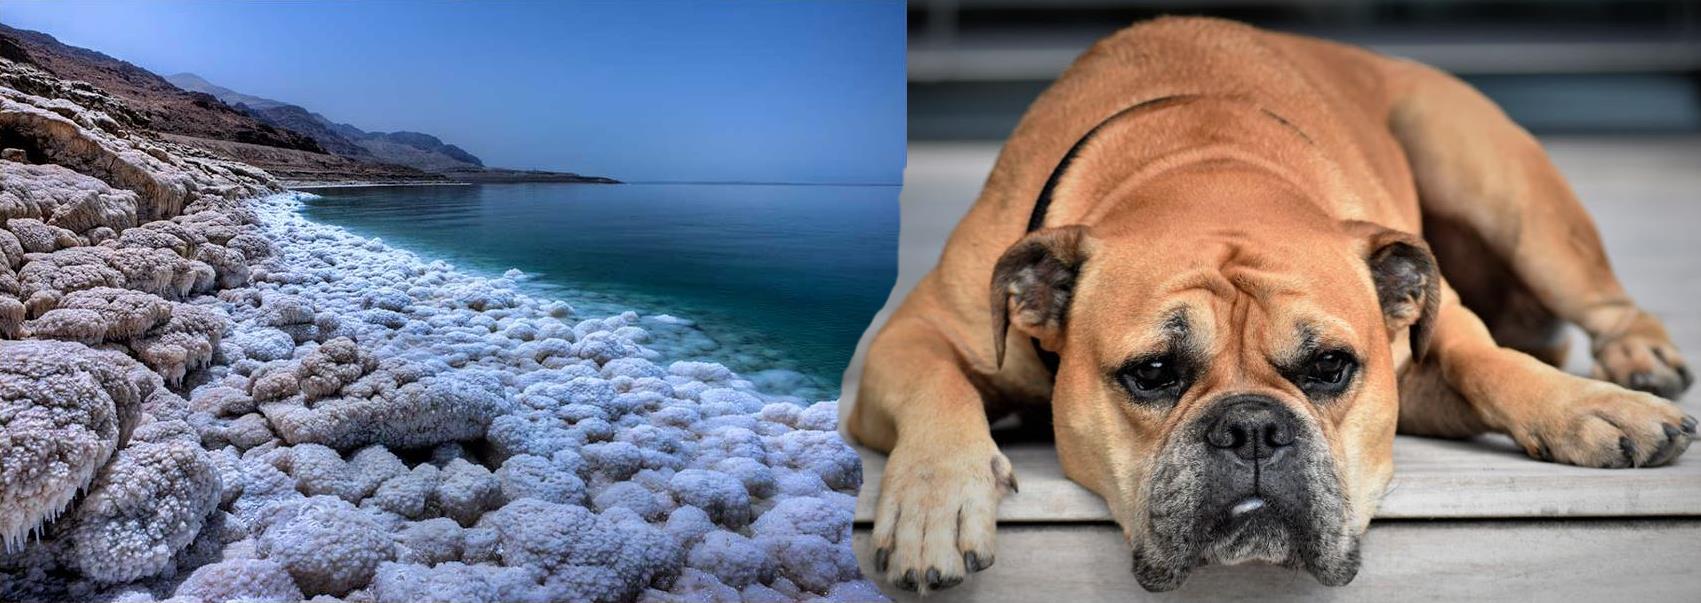 a picture of the shore line of the Dead Sea with clumps of dirty salt and a bull dog